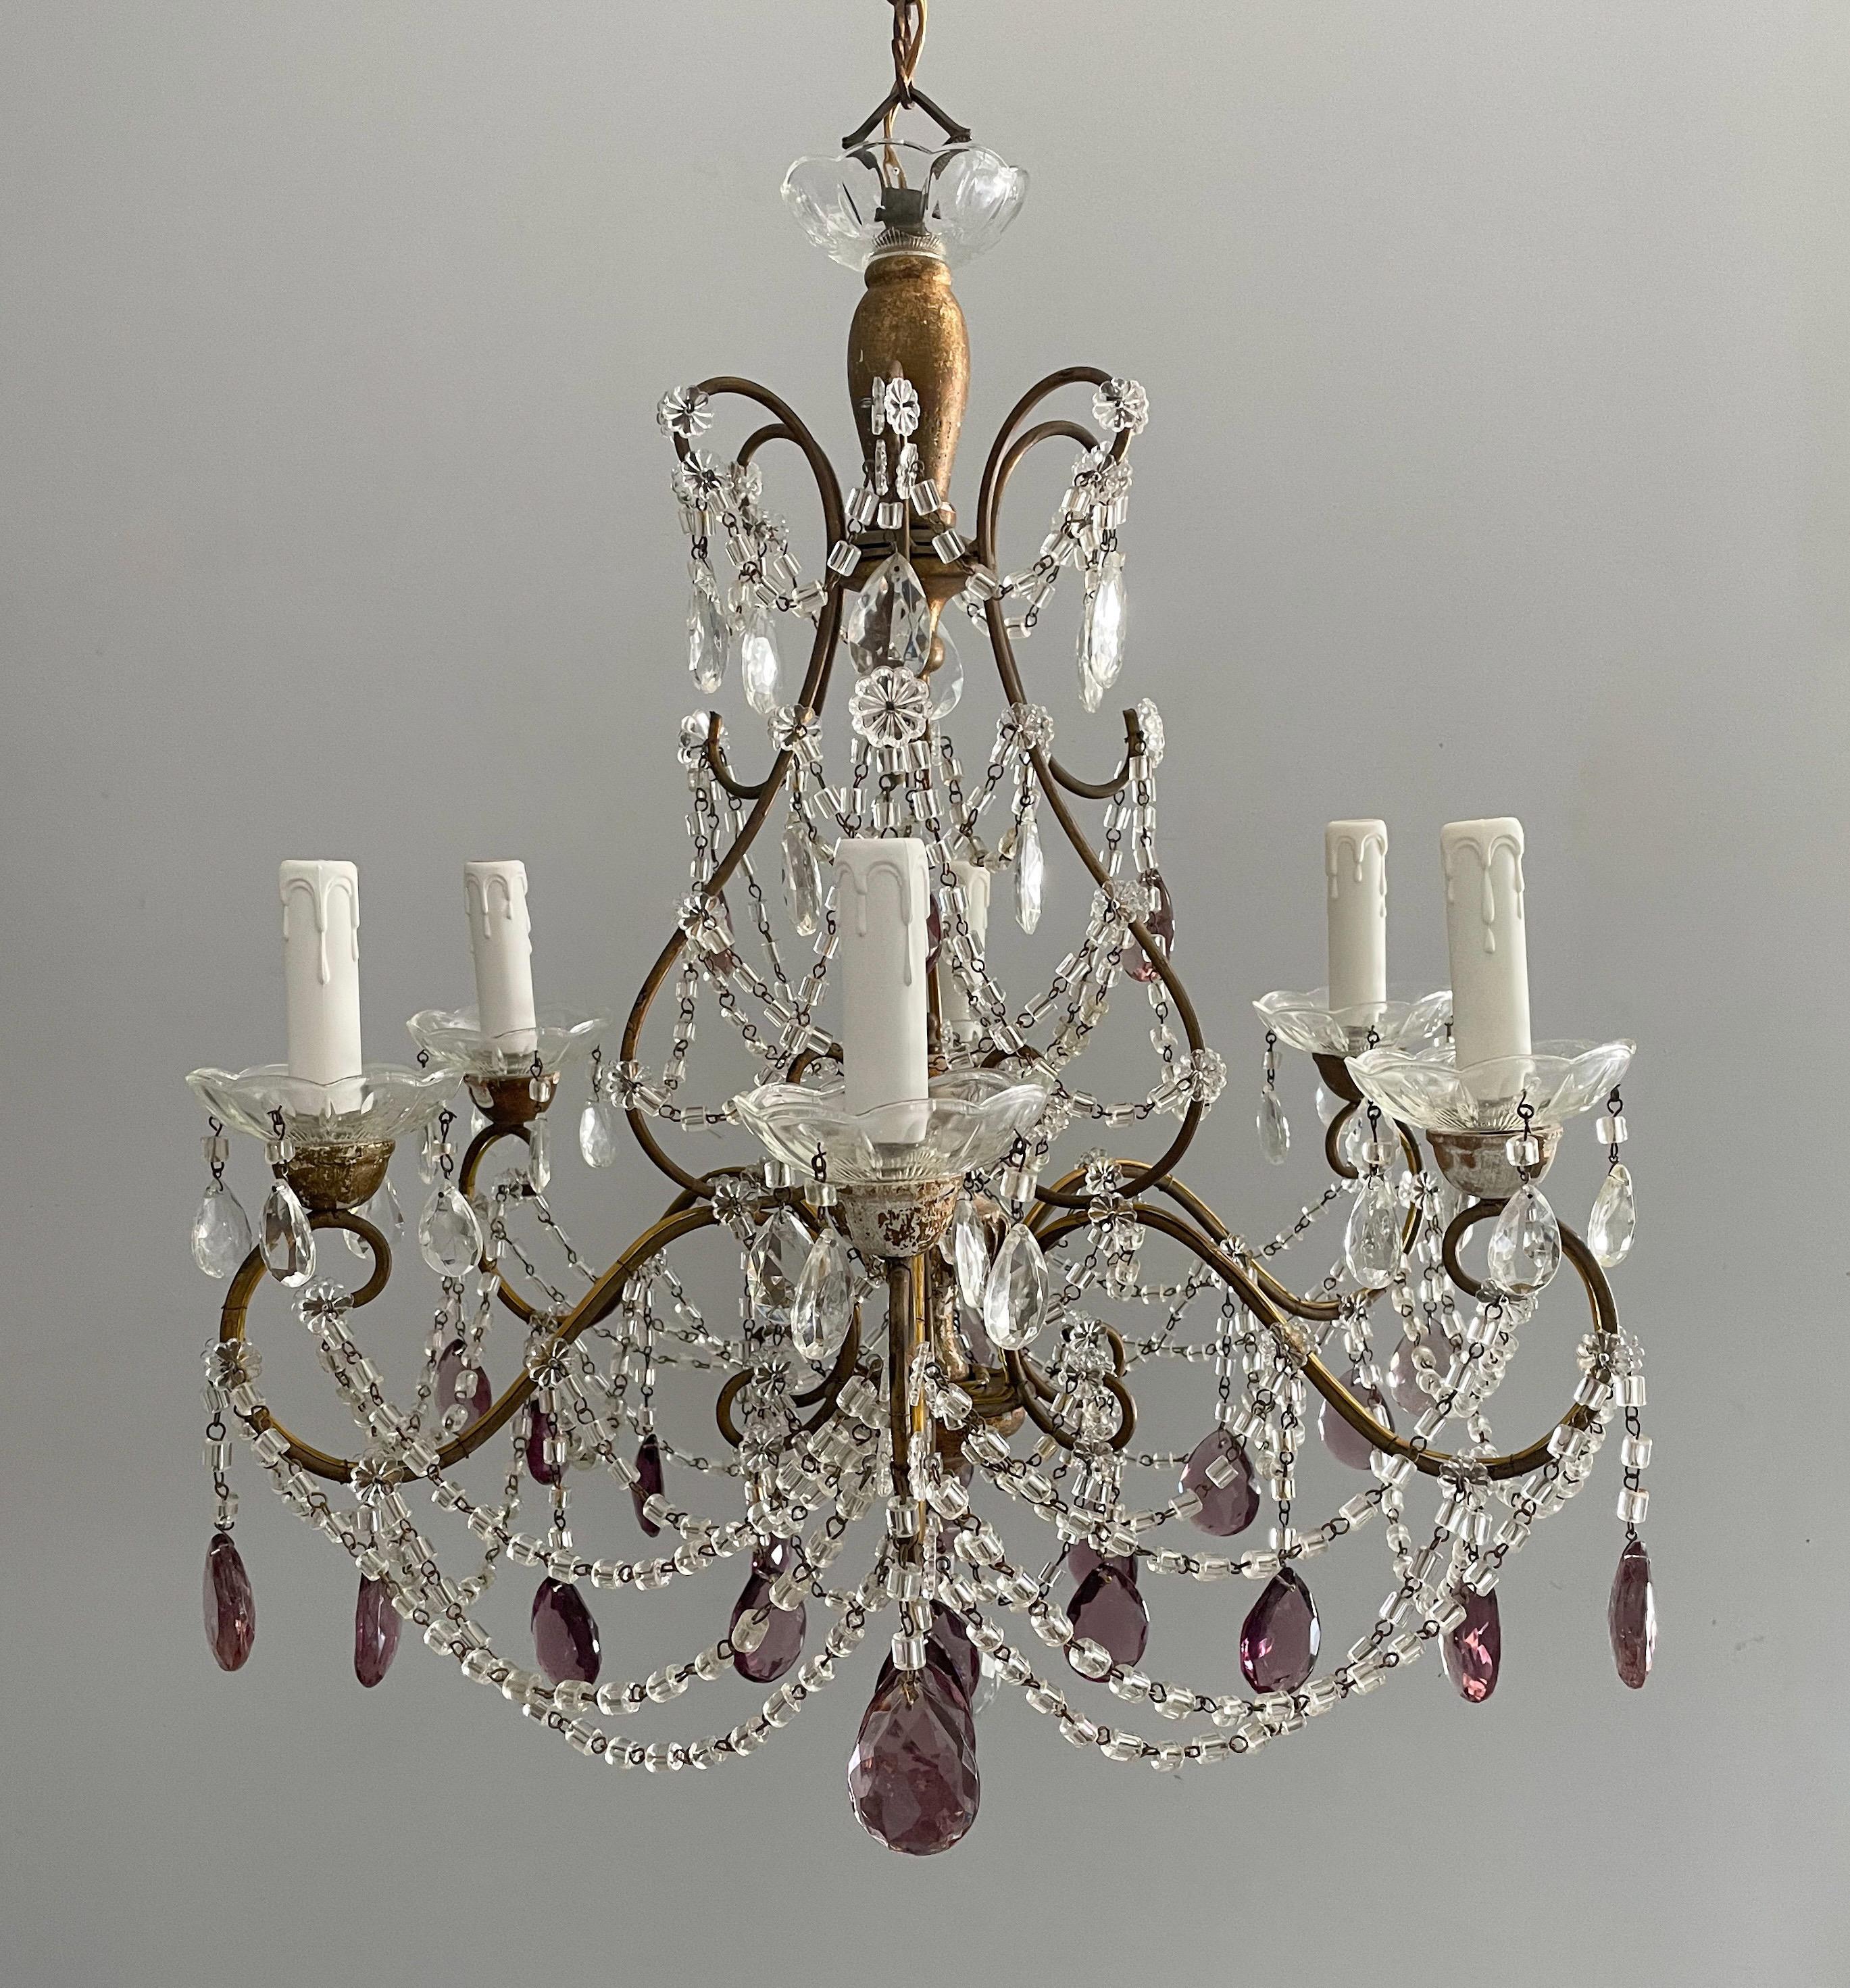 Exceptional, Italian 1920s gilt iron and crystal chandelier in the Louis XVI style. 

The chandelier consists of a scrolled iron frame decorated with carved gilt-wood accents, loads of “macaroni” glass beads and faceted prisms in various tones of